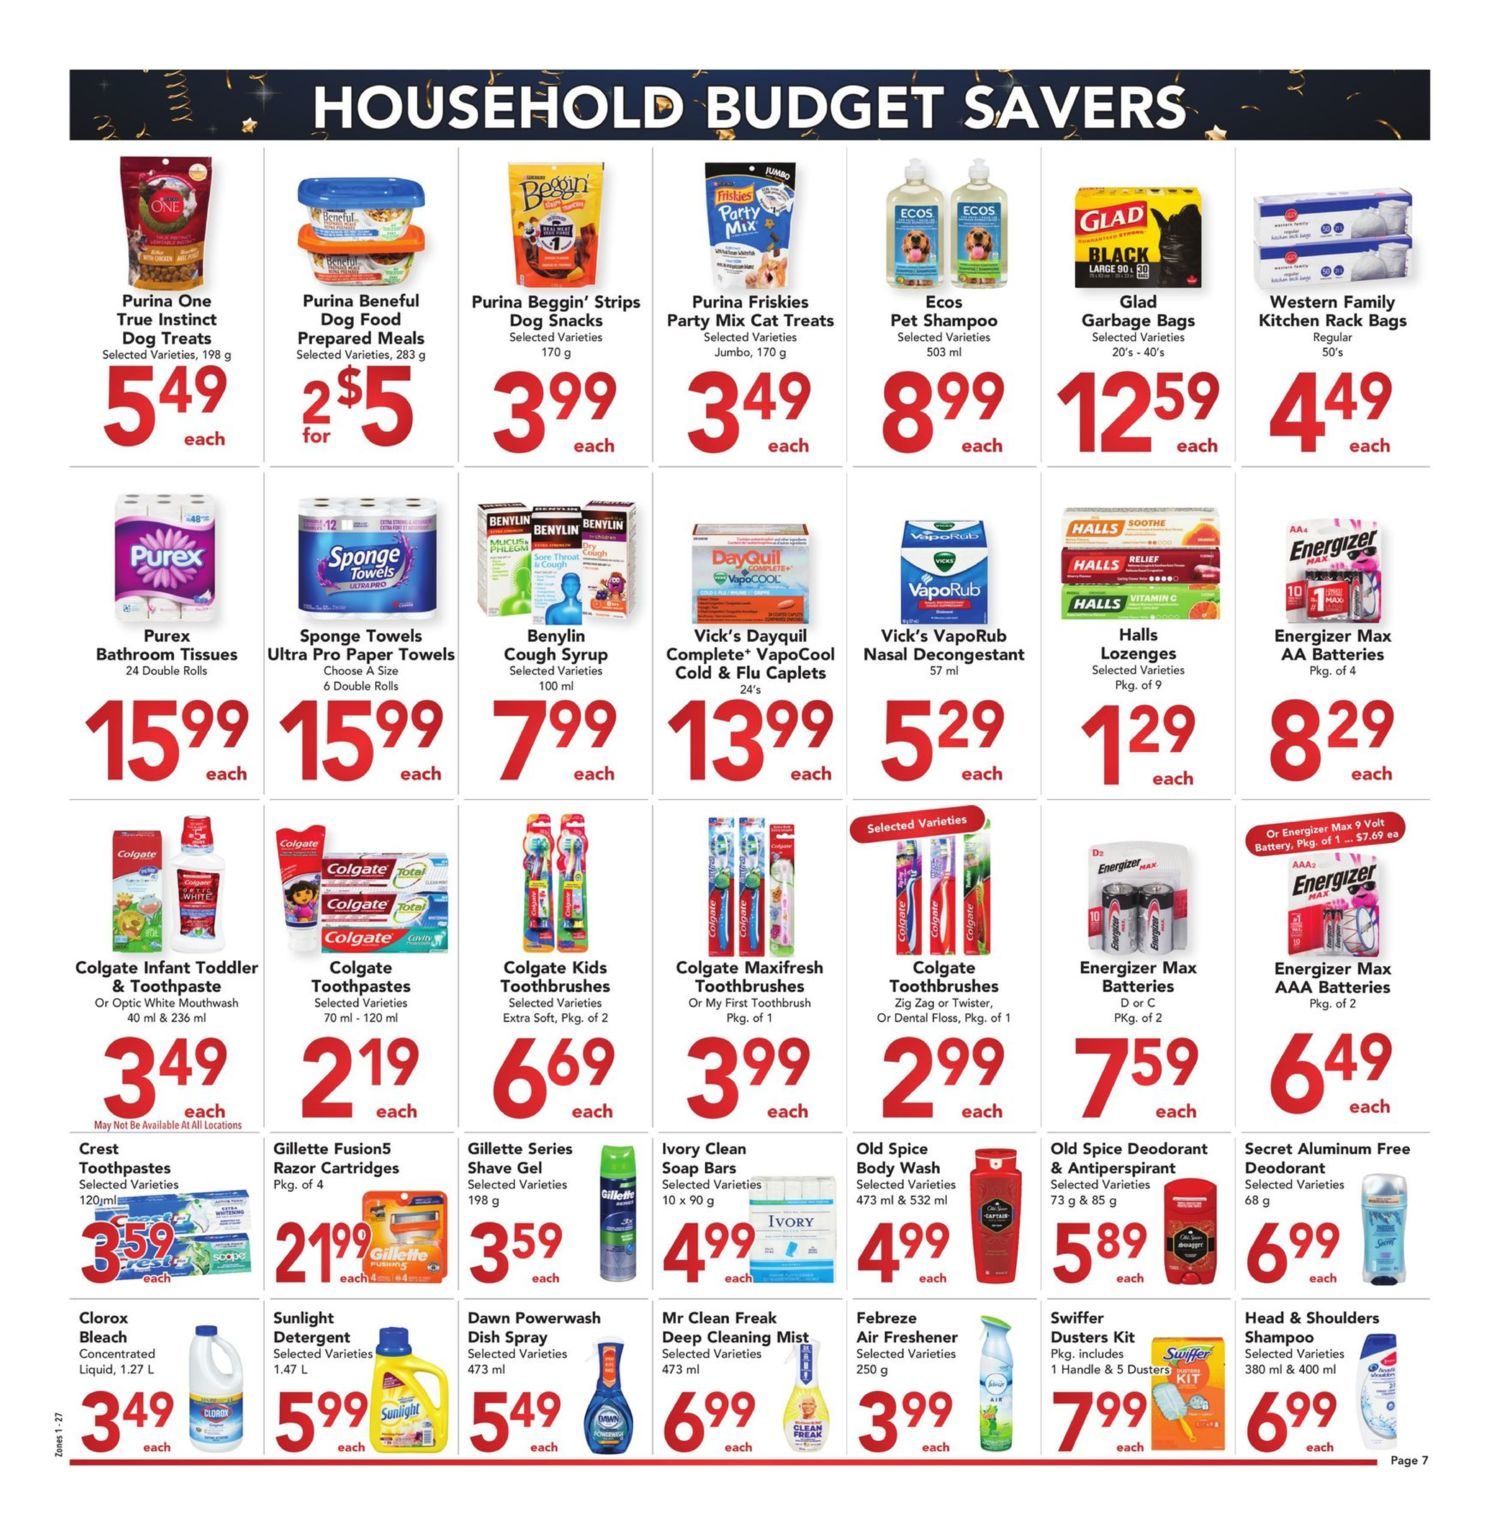 Buy-Low Foods - Budget Savers - Page 7